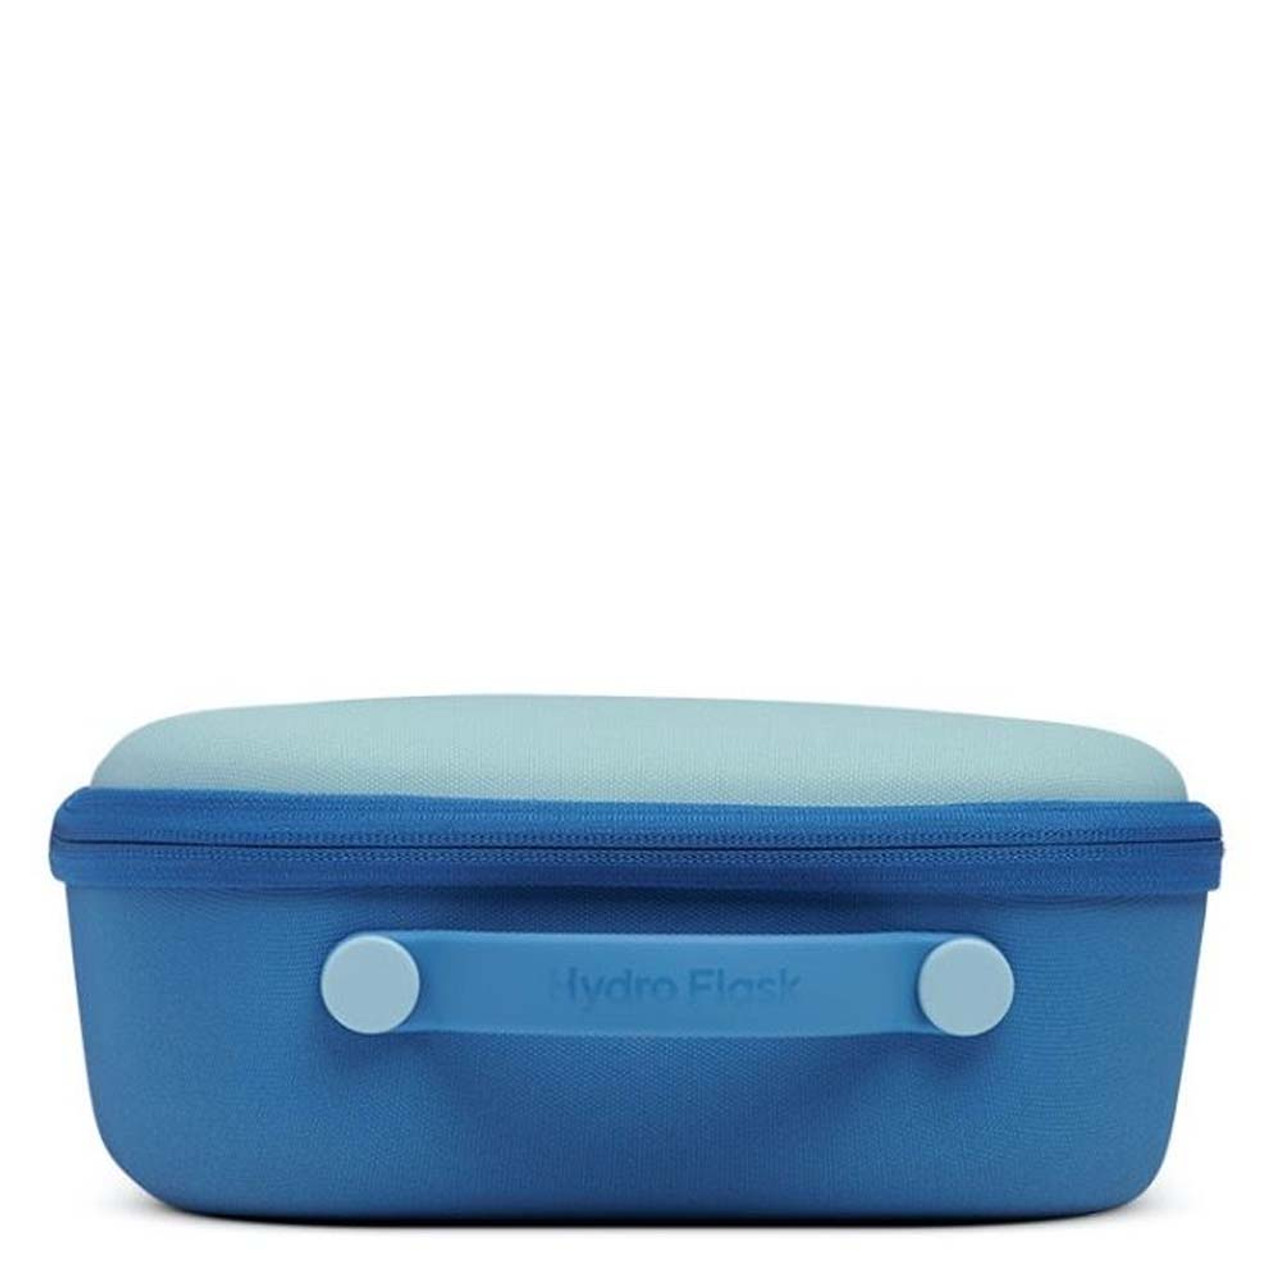 https://cdn11.bigcommerce.com/s-zut1msomd6/images/stencil/1280x1280/products/13496/213401/hydroflask-KLB-kids-insulated-lunch-box-ice-blue-handle__84329.1651682017.jpg?c=1